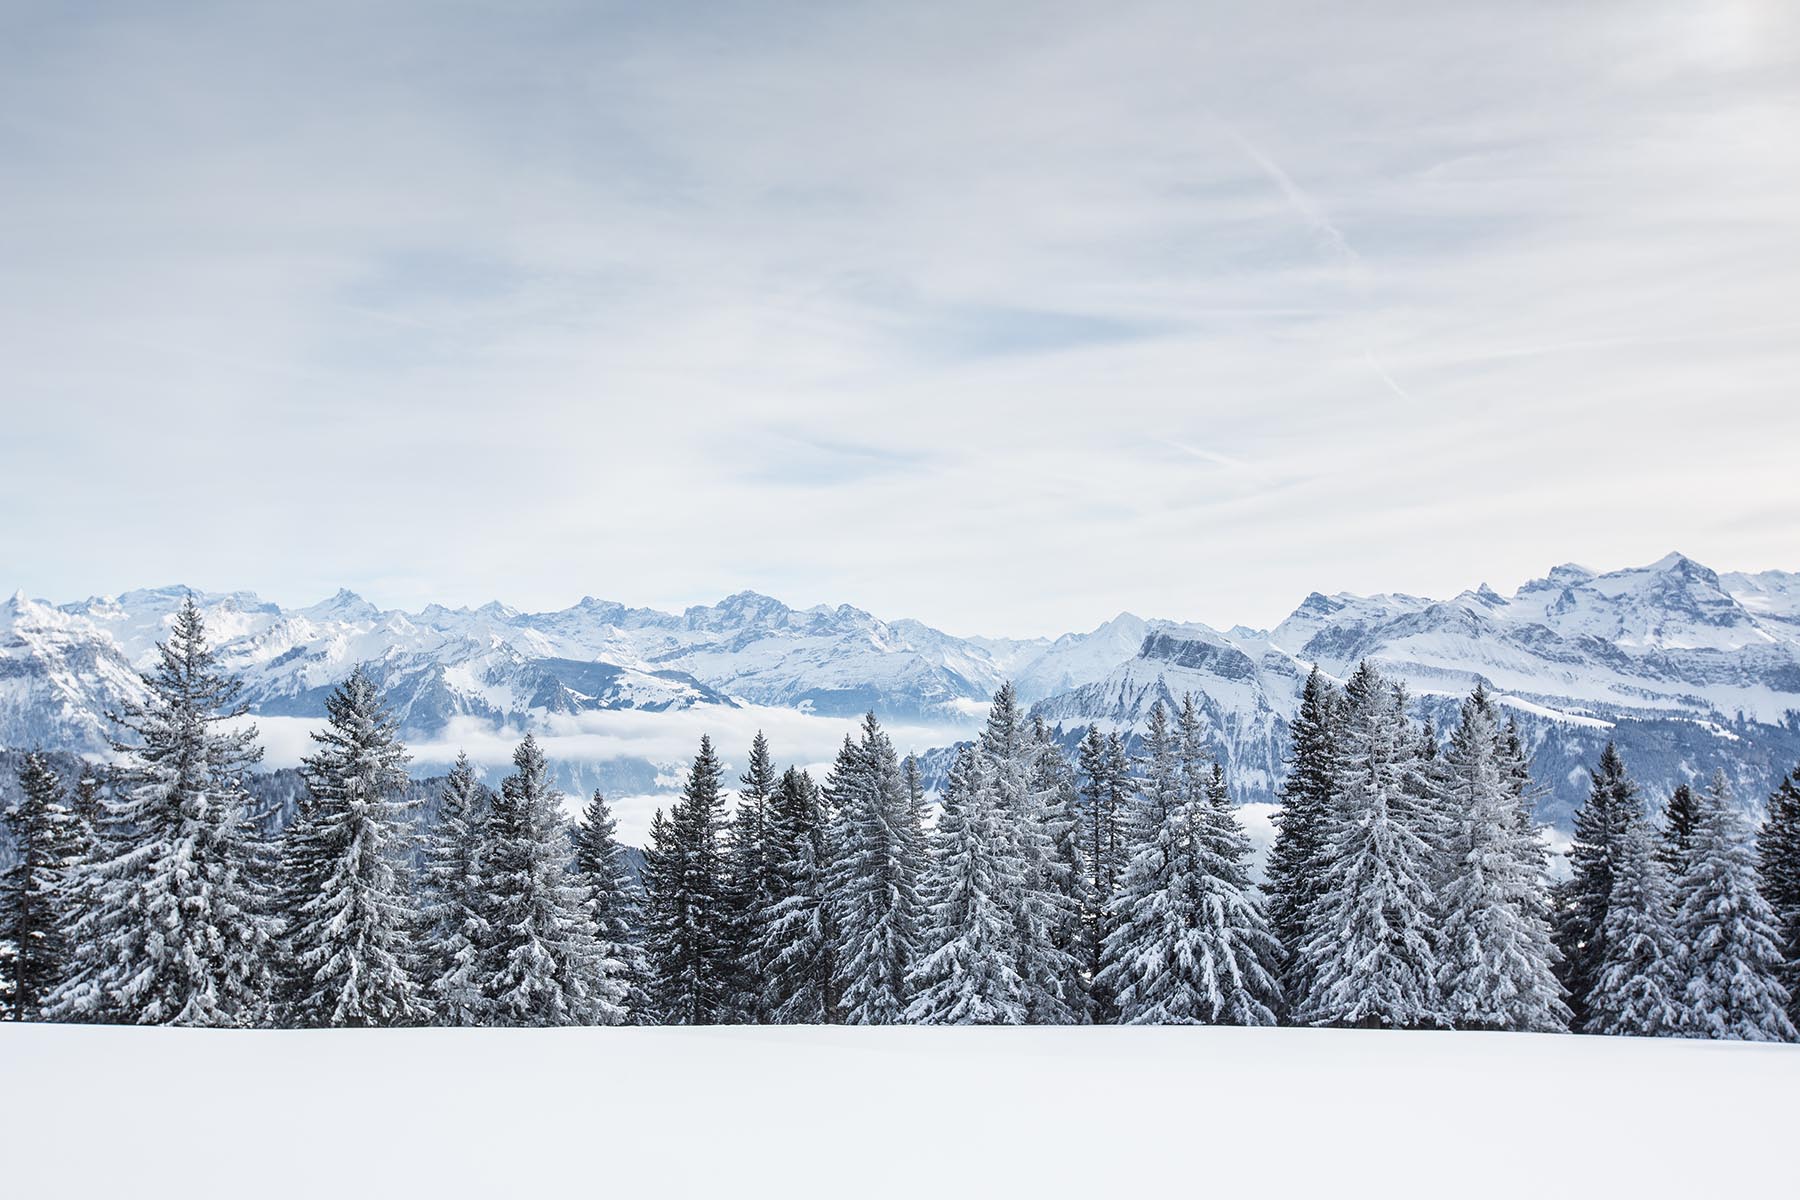 Splendid Winter Alpine Scenery With High Mountains And Trees Cov